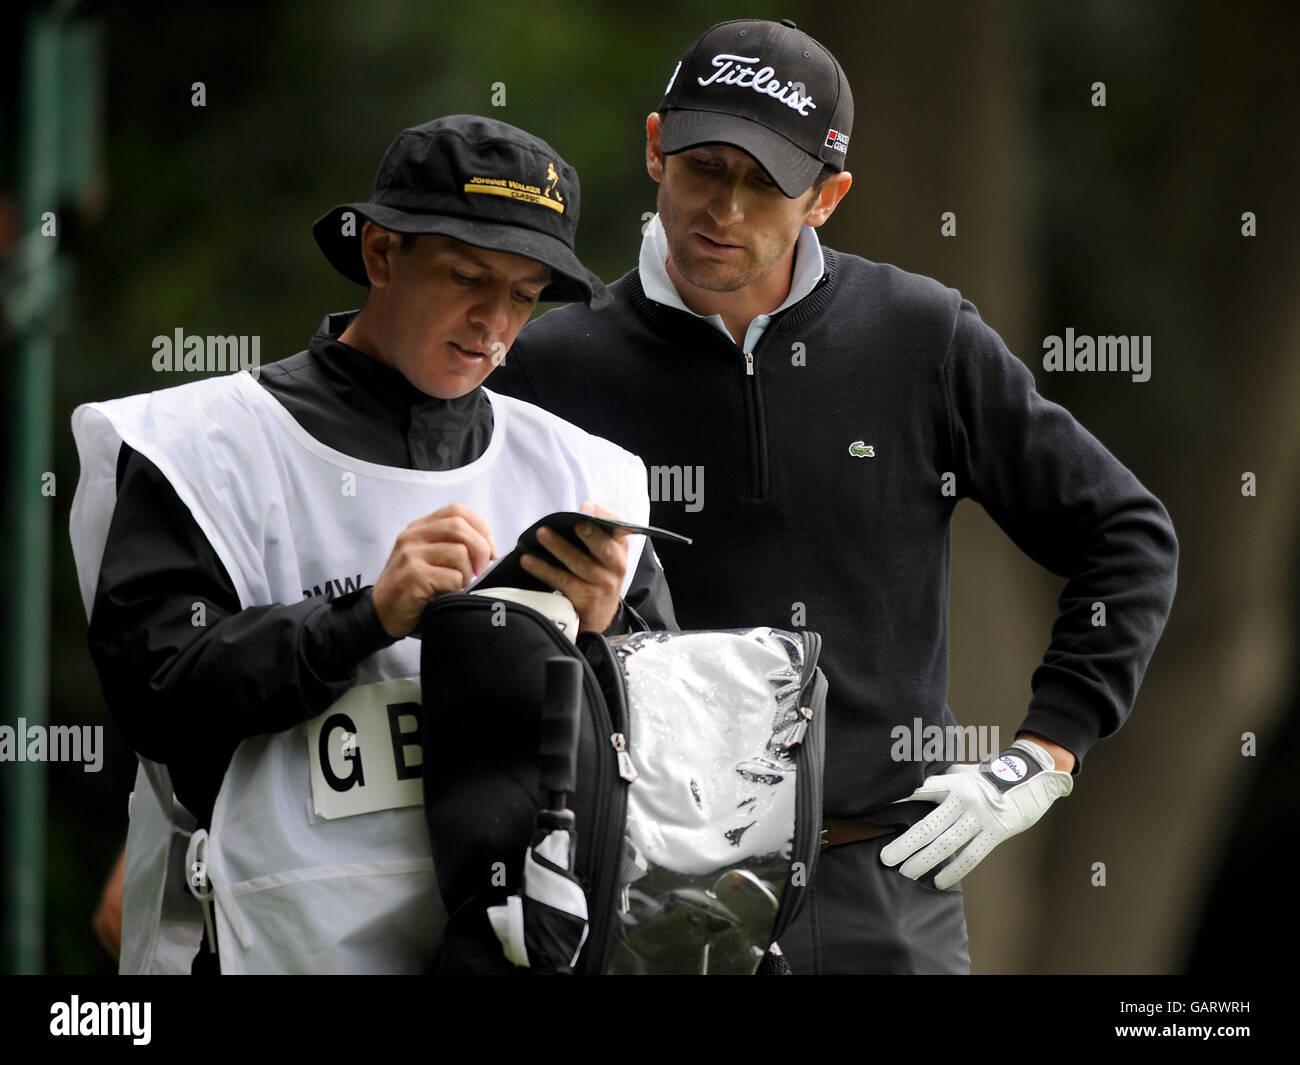 Golf - BMW PGA Championship 2008 - Round Four - Wentworth Golf Club - Virginia Water. Gregory Bourdy (r) checks his opponent's card with his caddie during the BMW PGA Championship at Wentworth Stock Photo